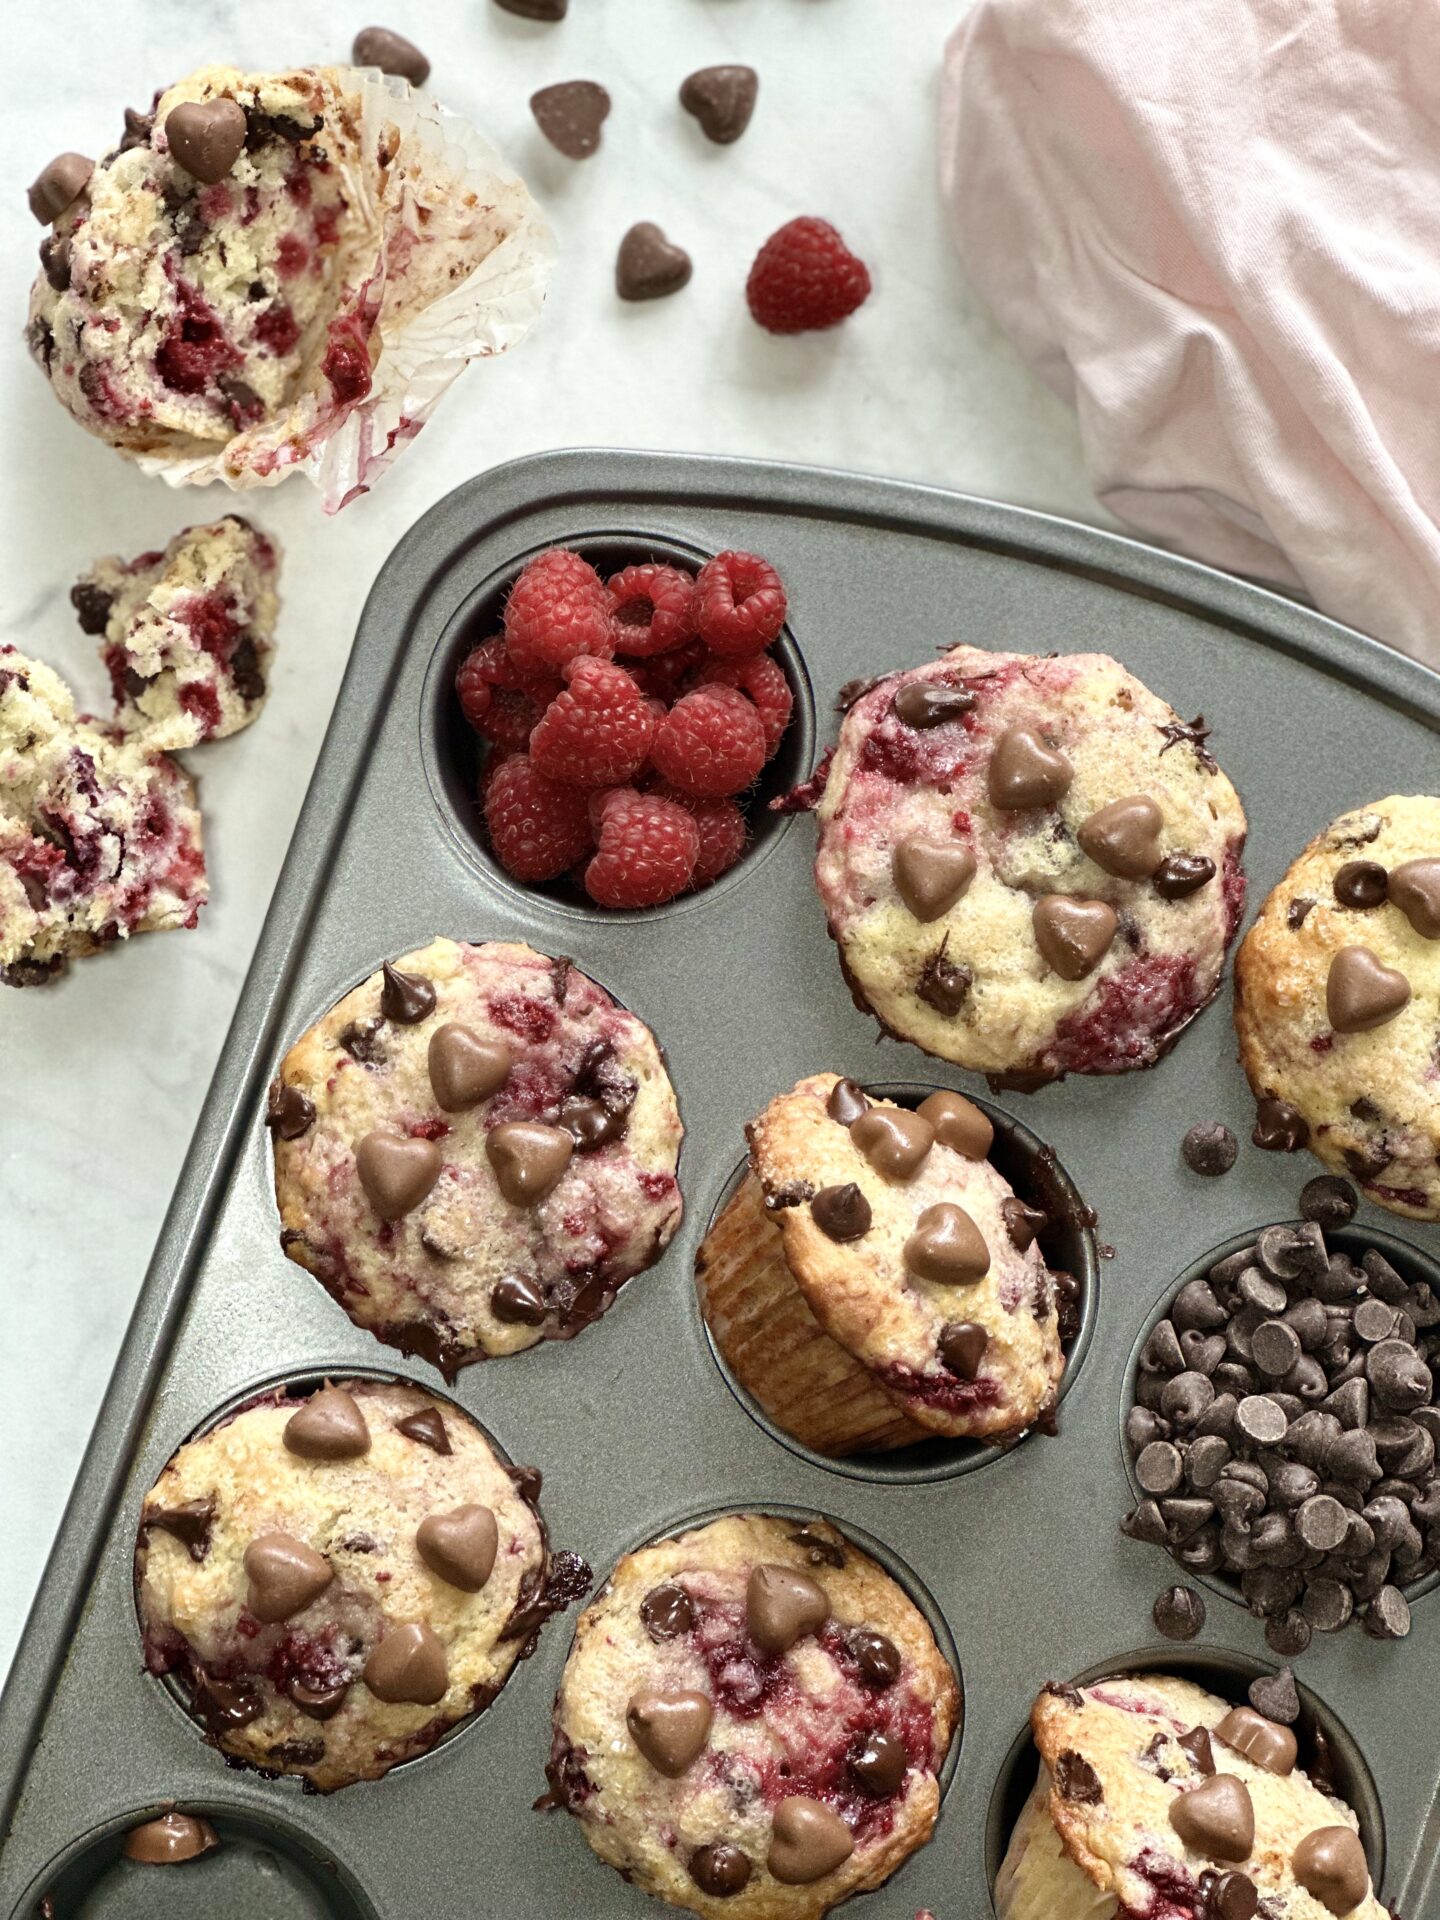 A pan of decadent raspberry chocolate chip muffins garnished with chocolate hearts for valentines day, seen with fresh raspberries and heart shaped chocolates